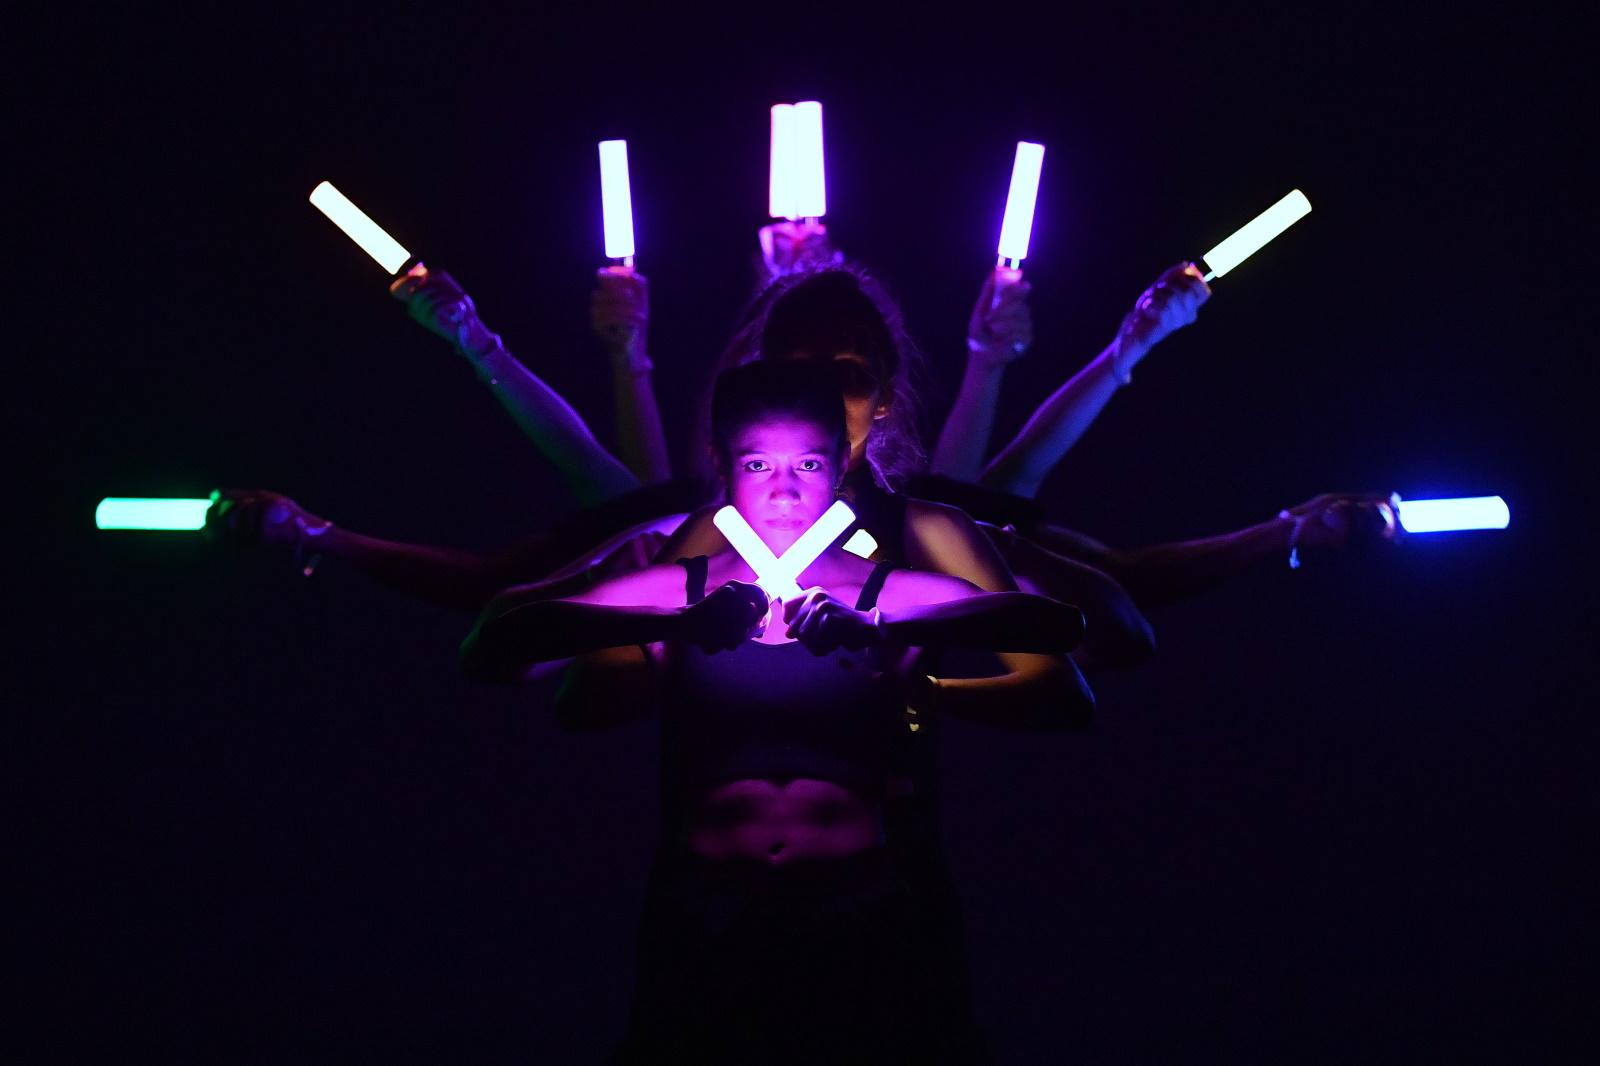 Performers hold lights during a dance performance at Cabaret.